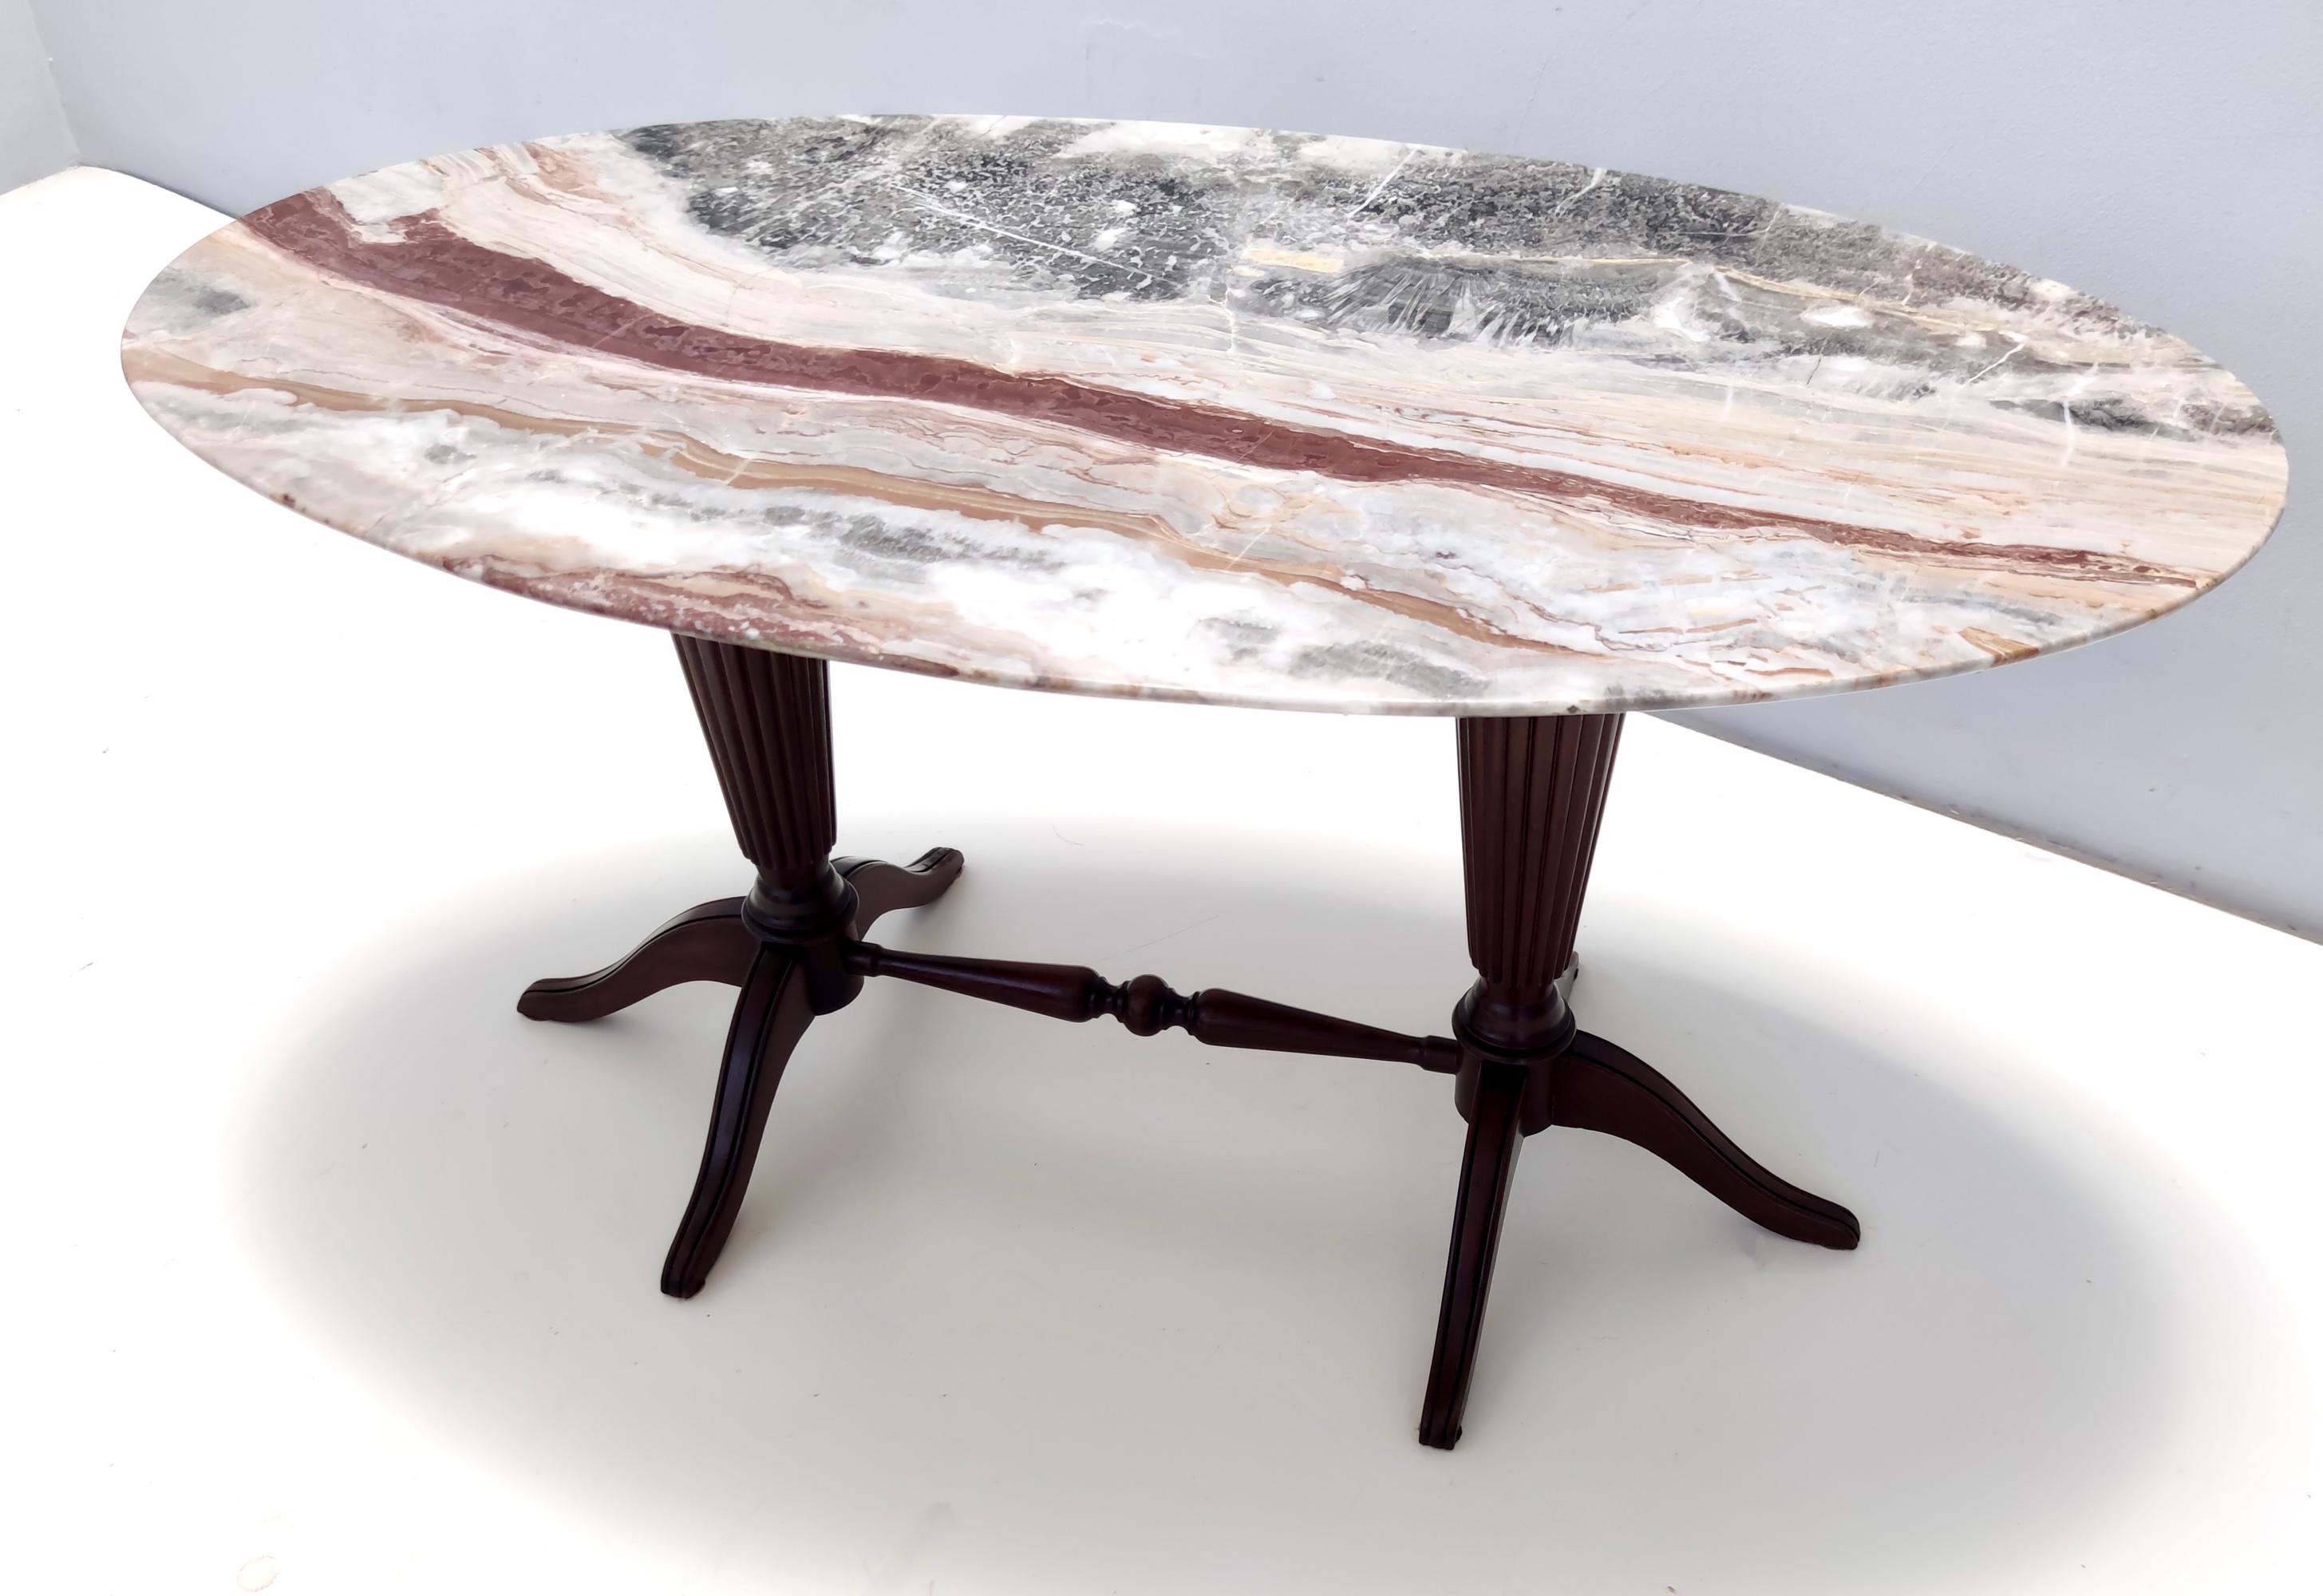 Vintage Beech Coffee Table Ascribable to Paolo Buffa with an Oval Red Onyx Top In Excellent Condition For Sale In Bresso, Lombardy